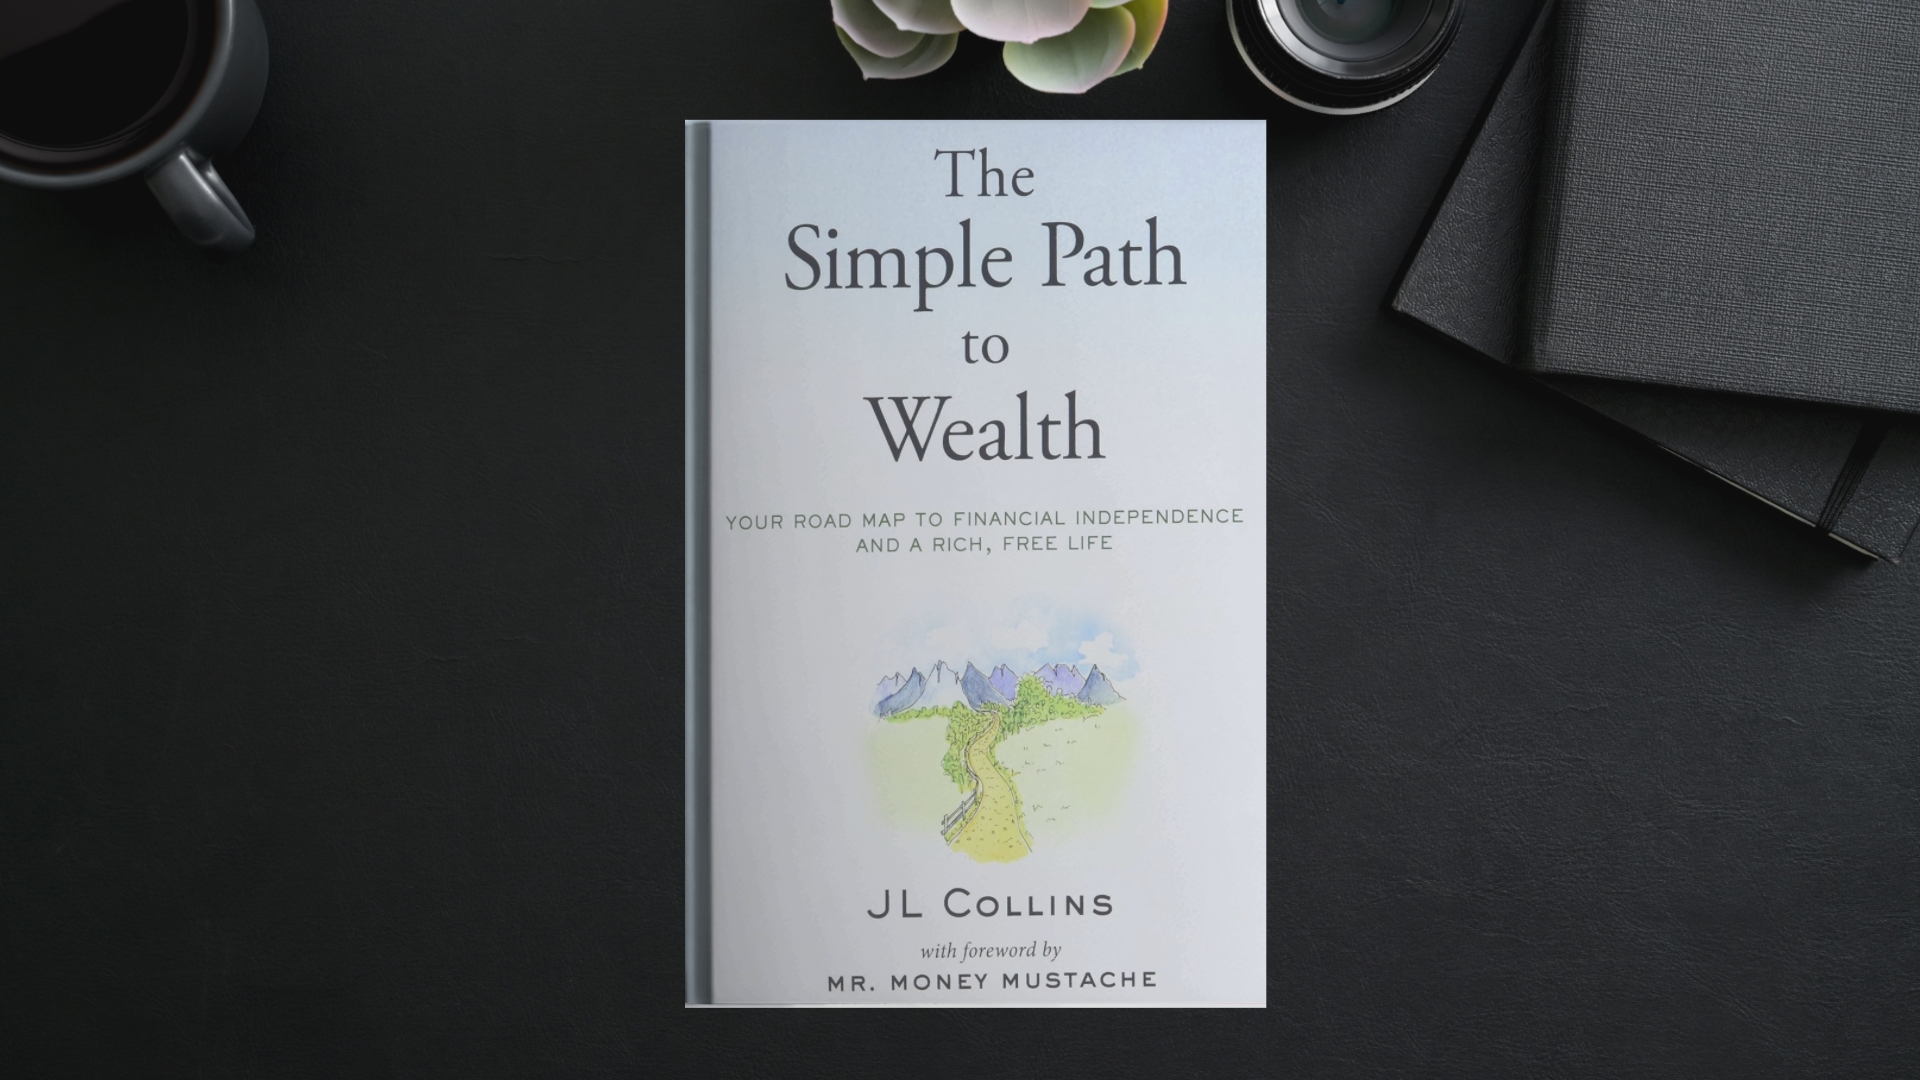 The simple path to wealth book